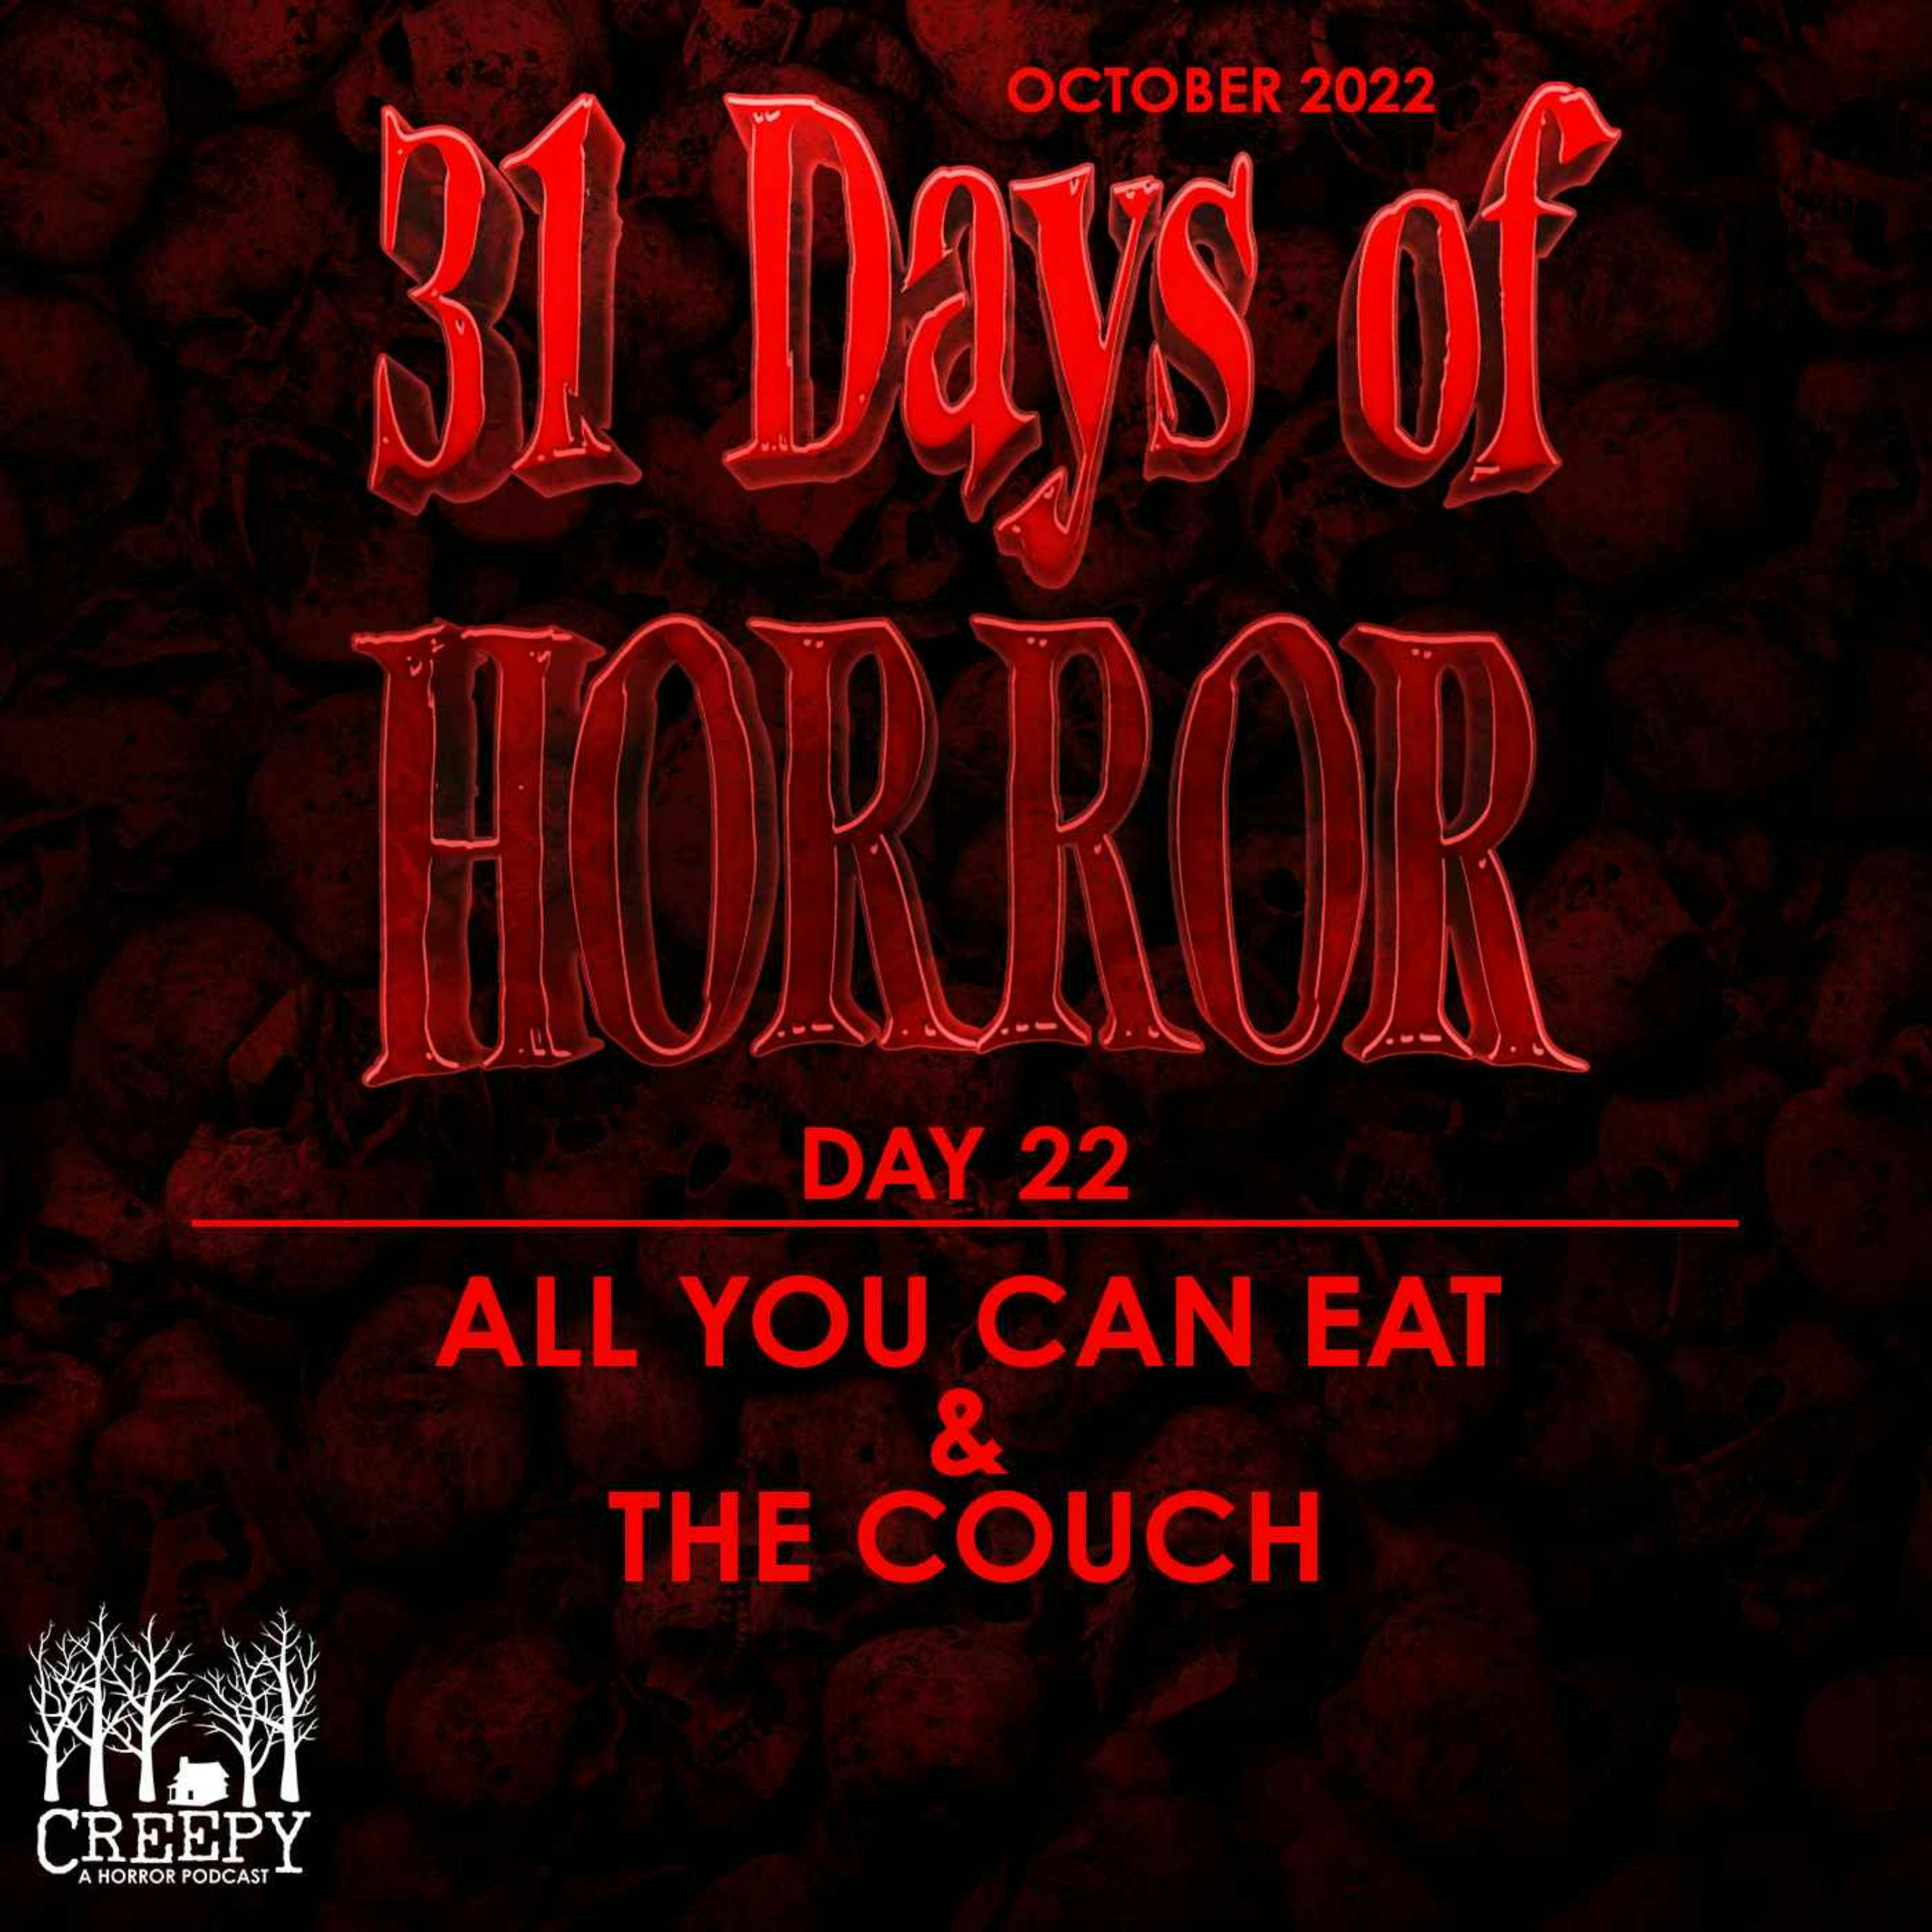 Day 22 - All You Can Eat & The Couch